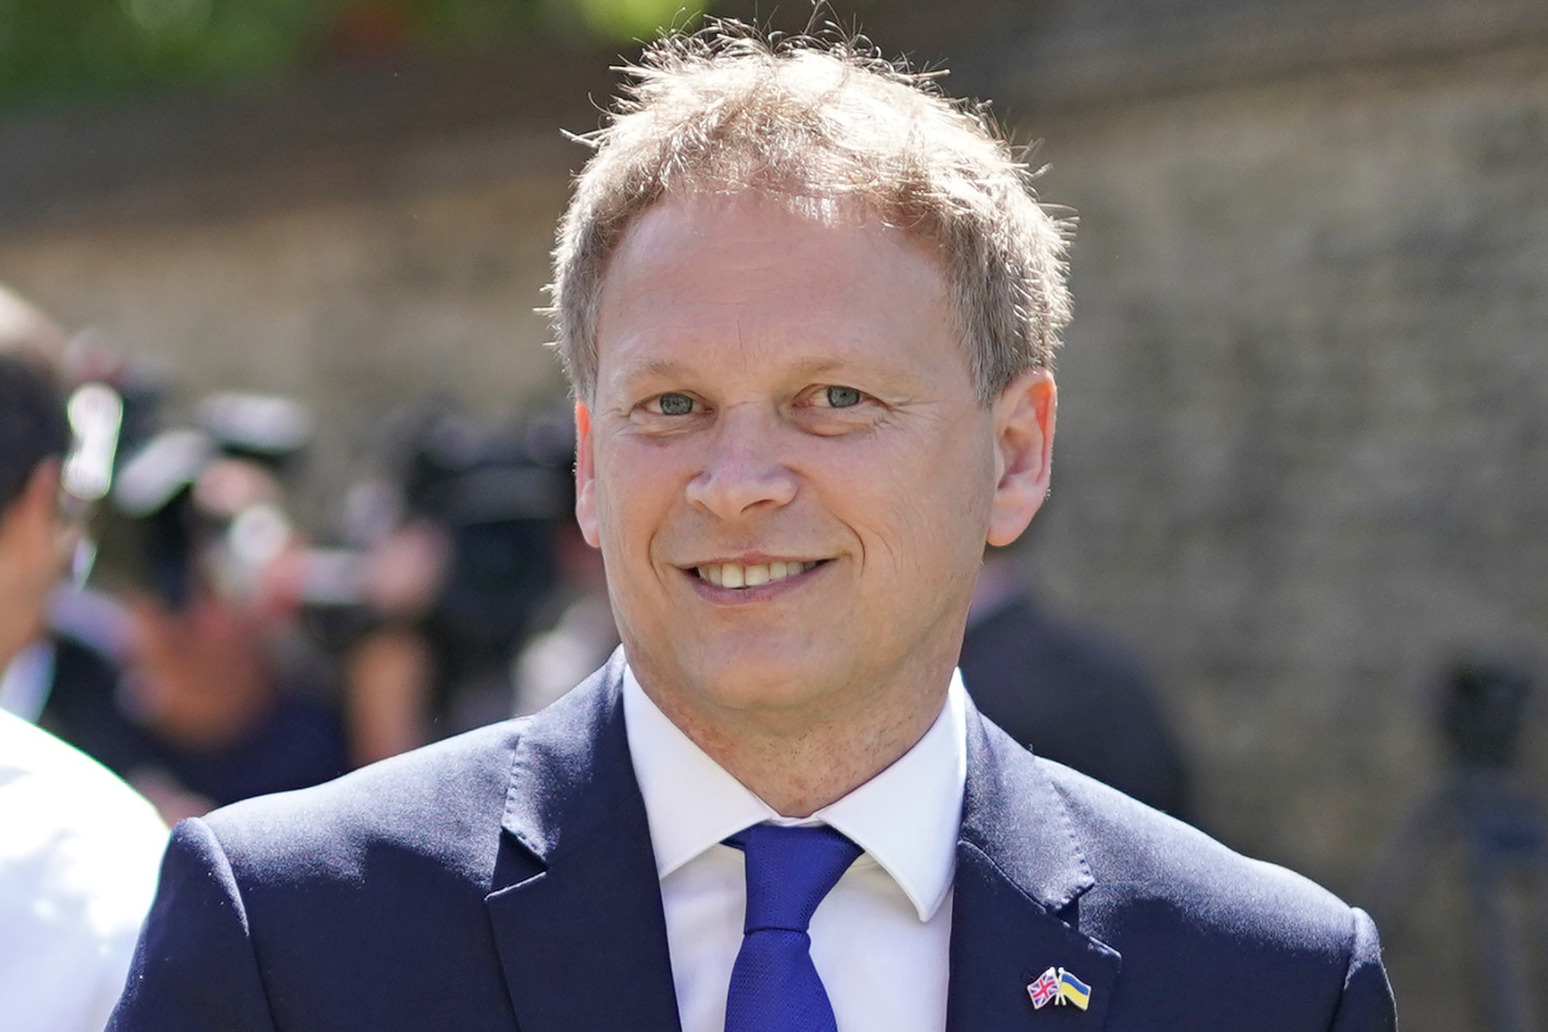 Grant Shapps criticises rail unions as he unveils £1bn east coast digital investment 